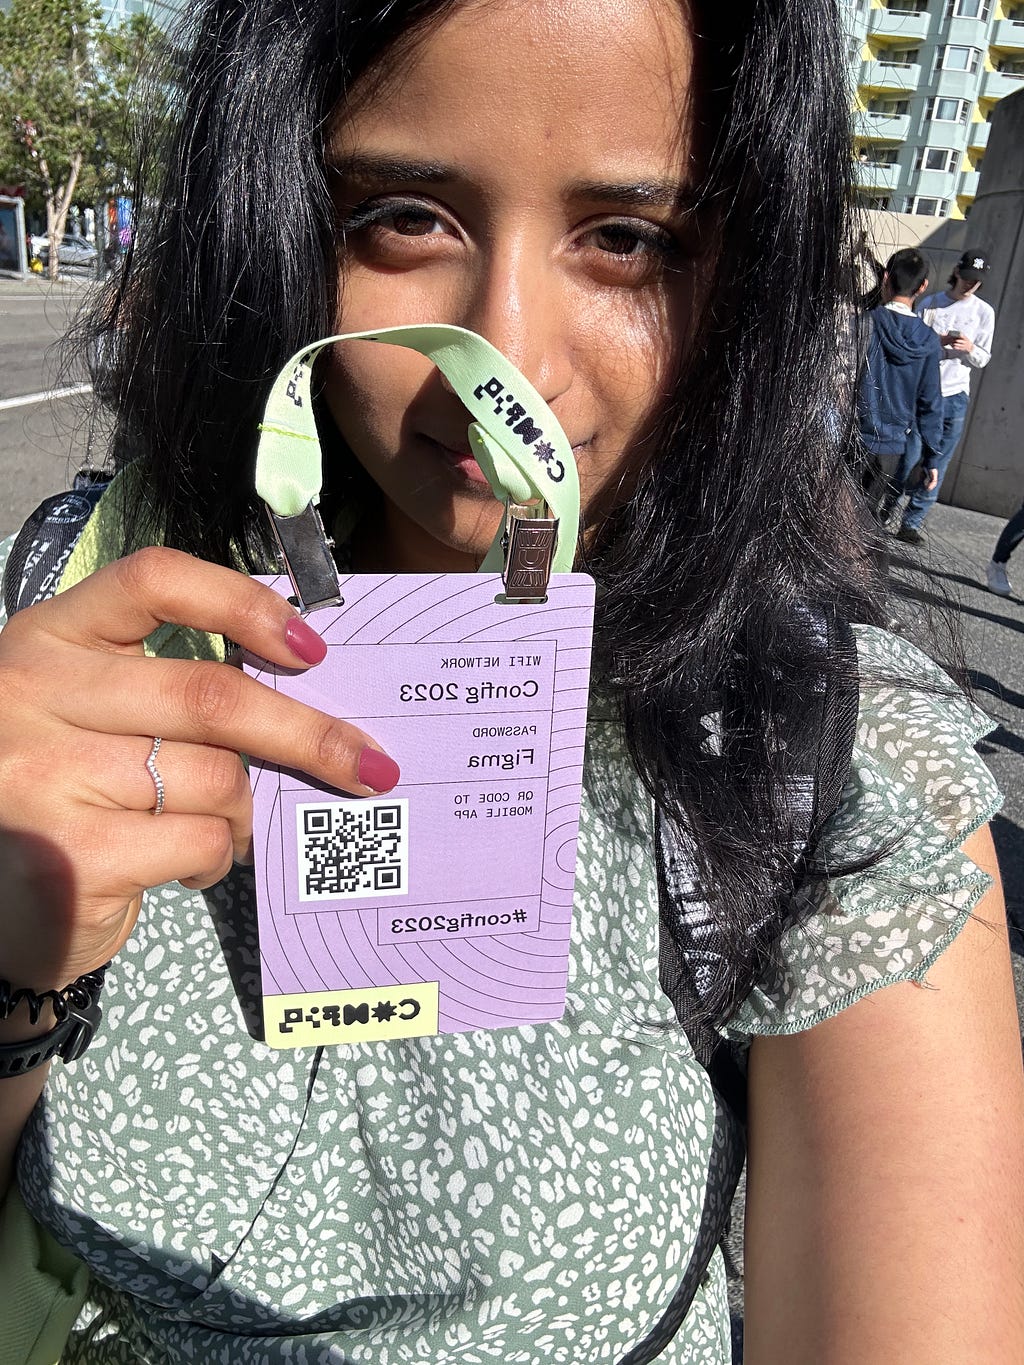 A selfie photo of a woman showing an entry card to config event.